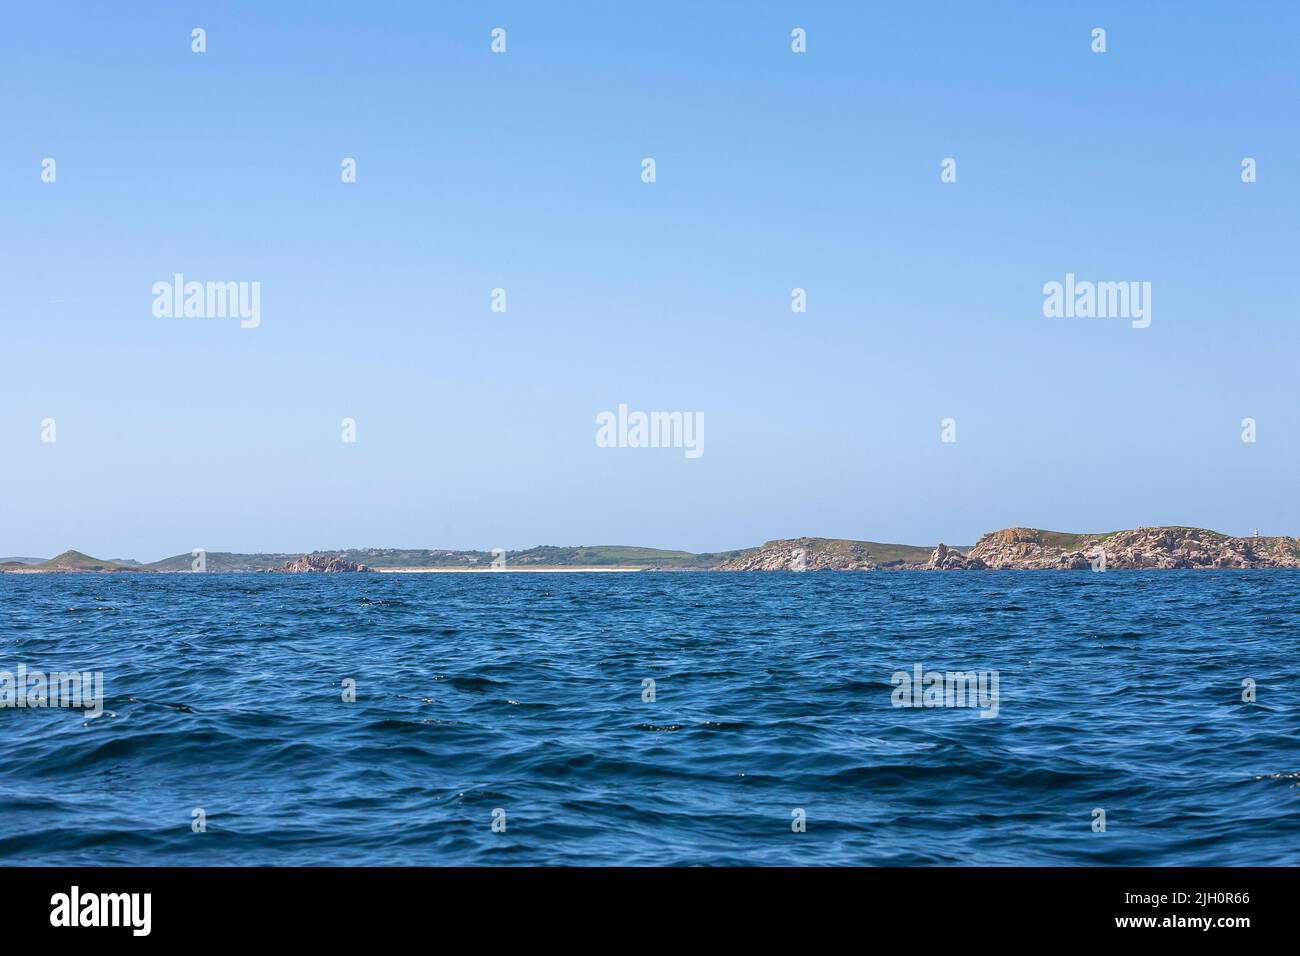 Approaching the Isles of Scilly by sea: the Eastern Isles and St. Martin's, with its distinctive Day Mark on the hilltop: Isles of Scilly, UK Stock Photo